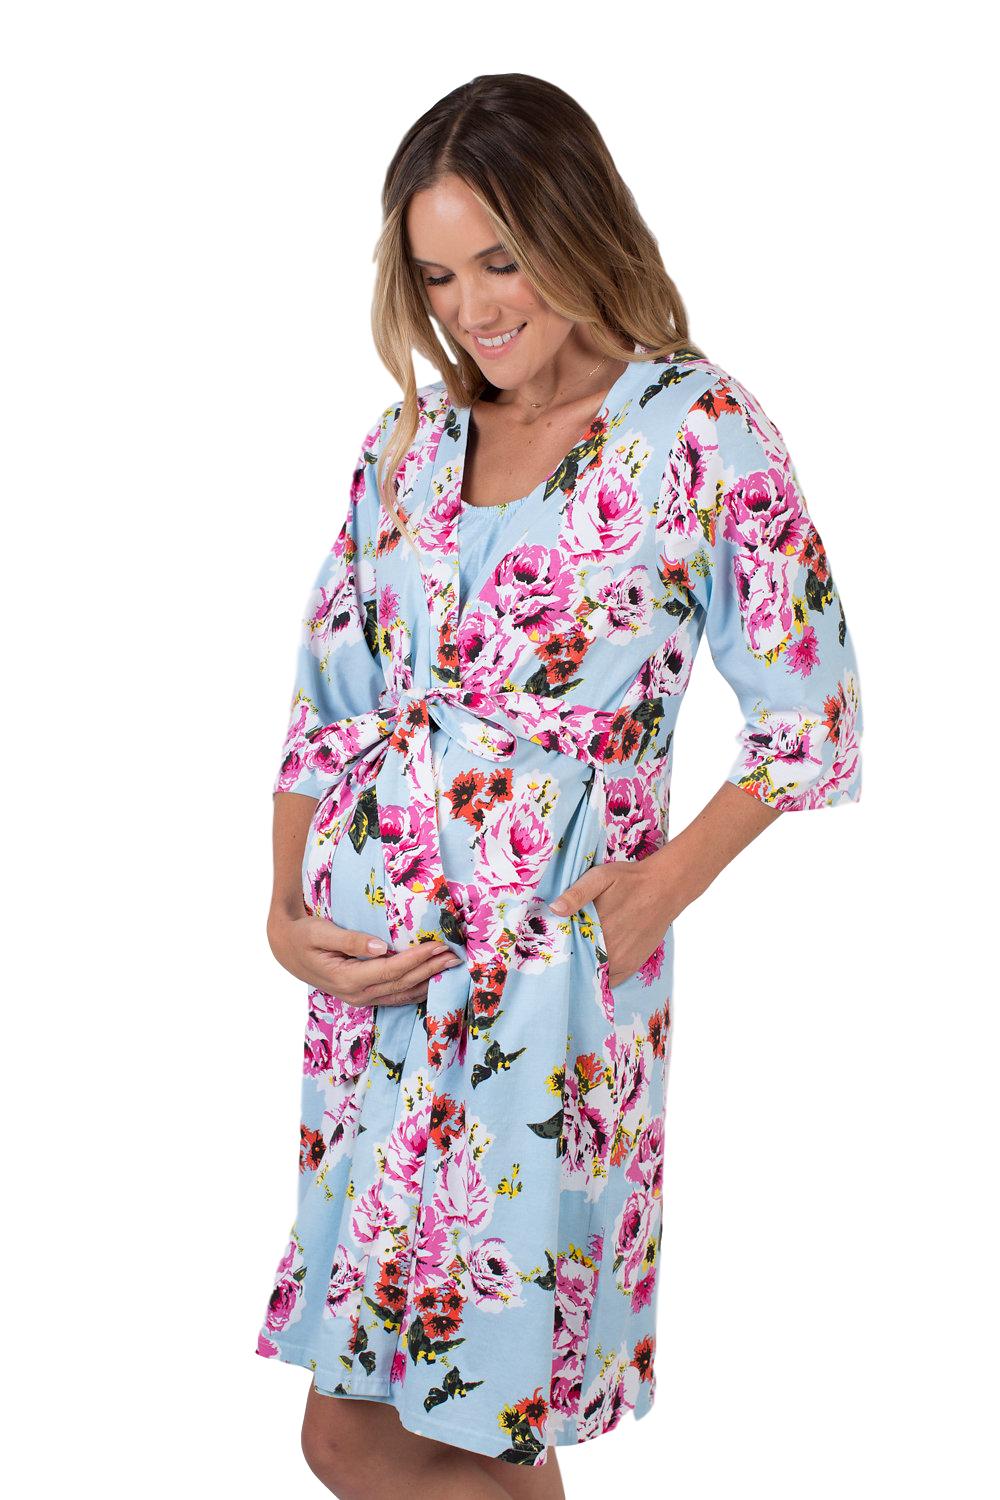 Maternity Hospital Delivery Robe & Matching Baby Girl Swaddle Blanket ...